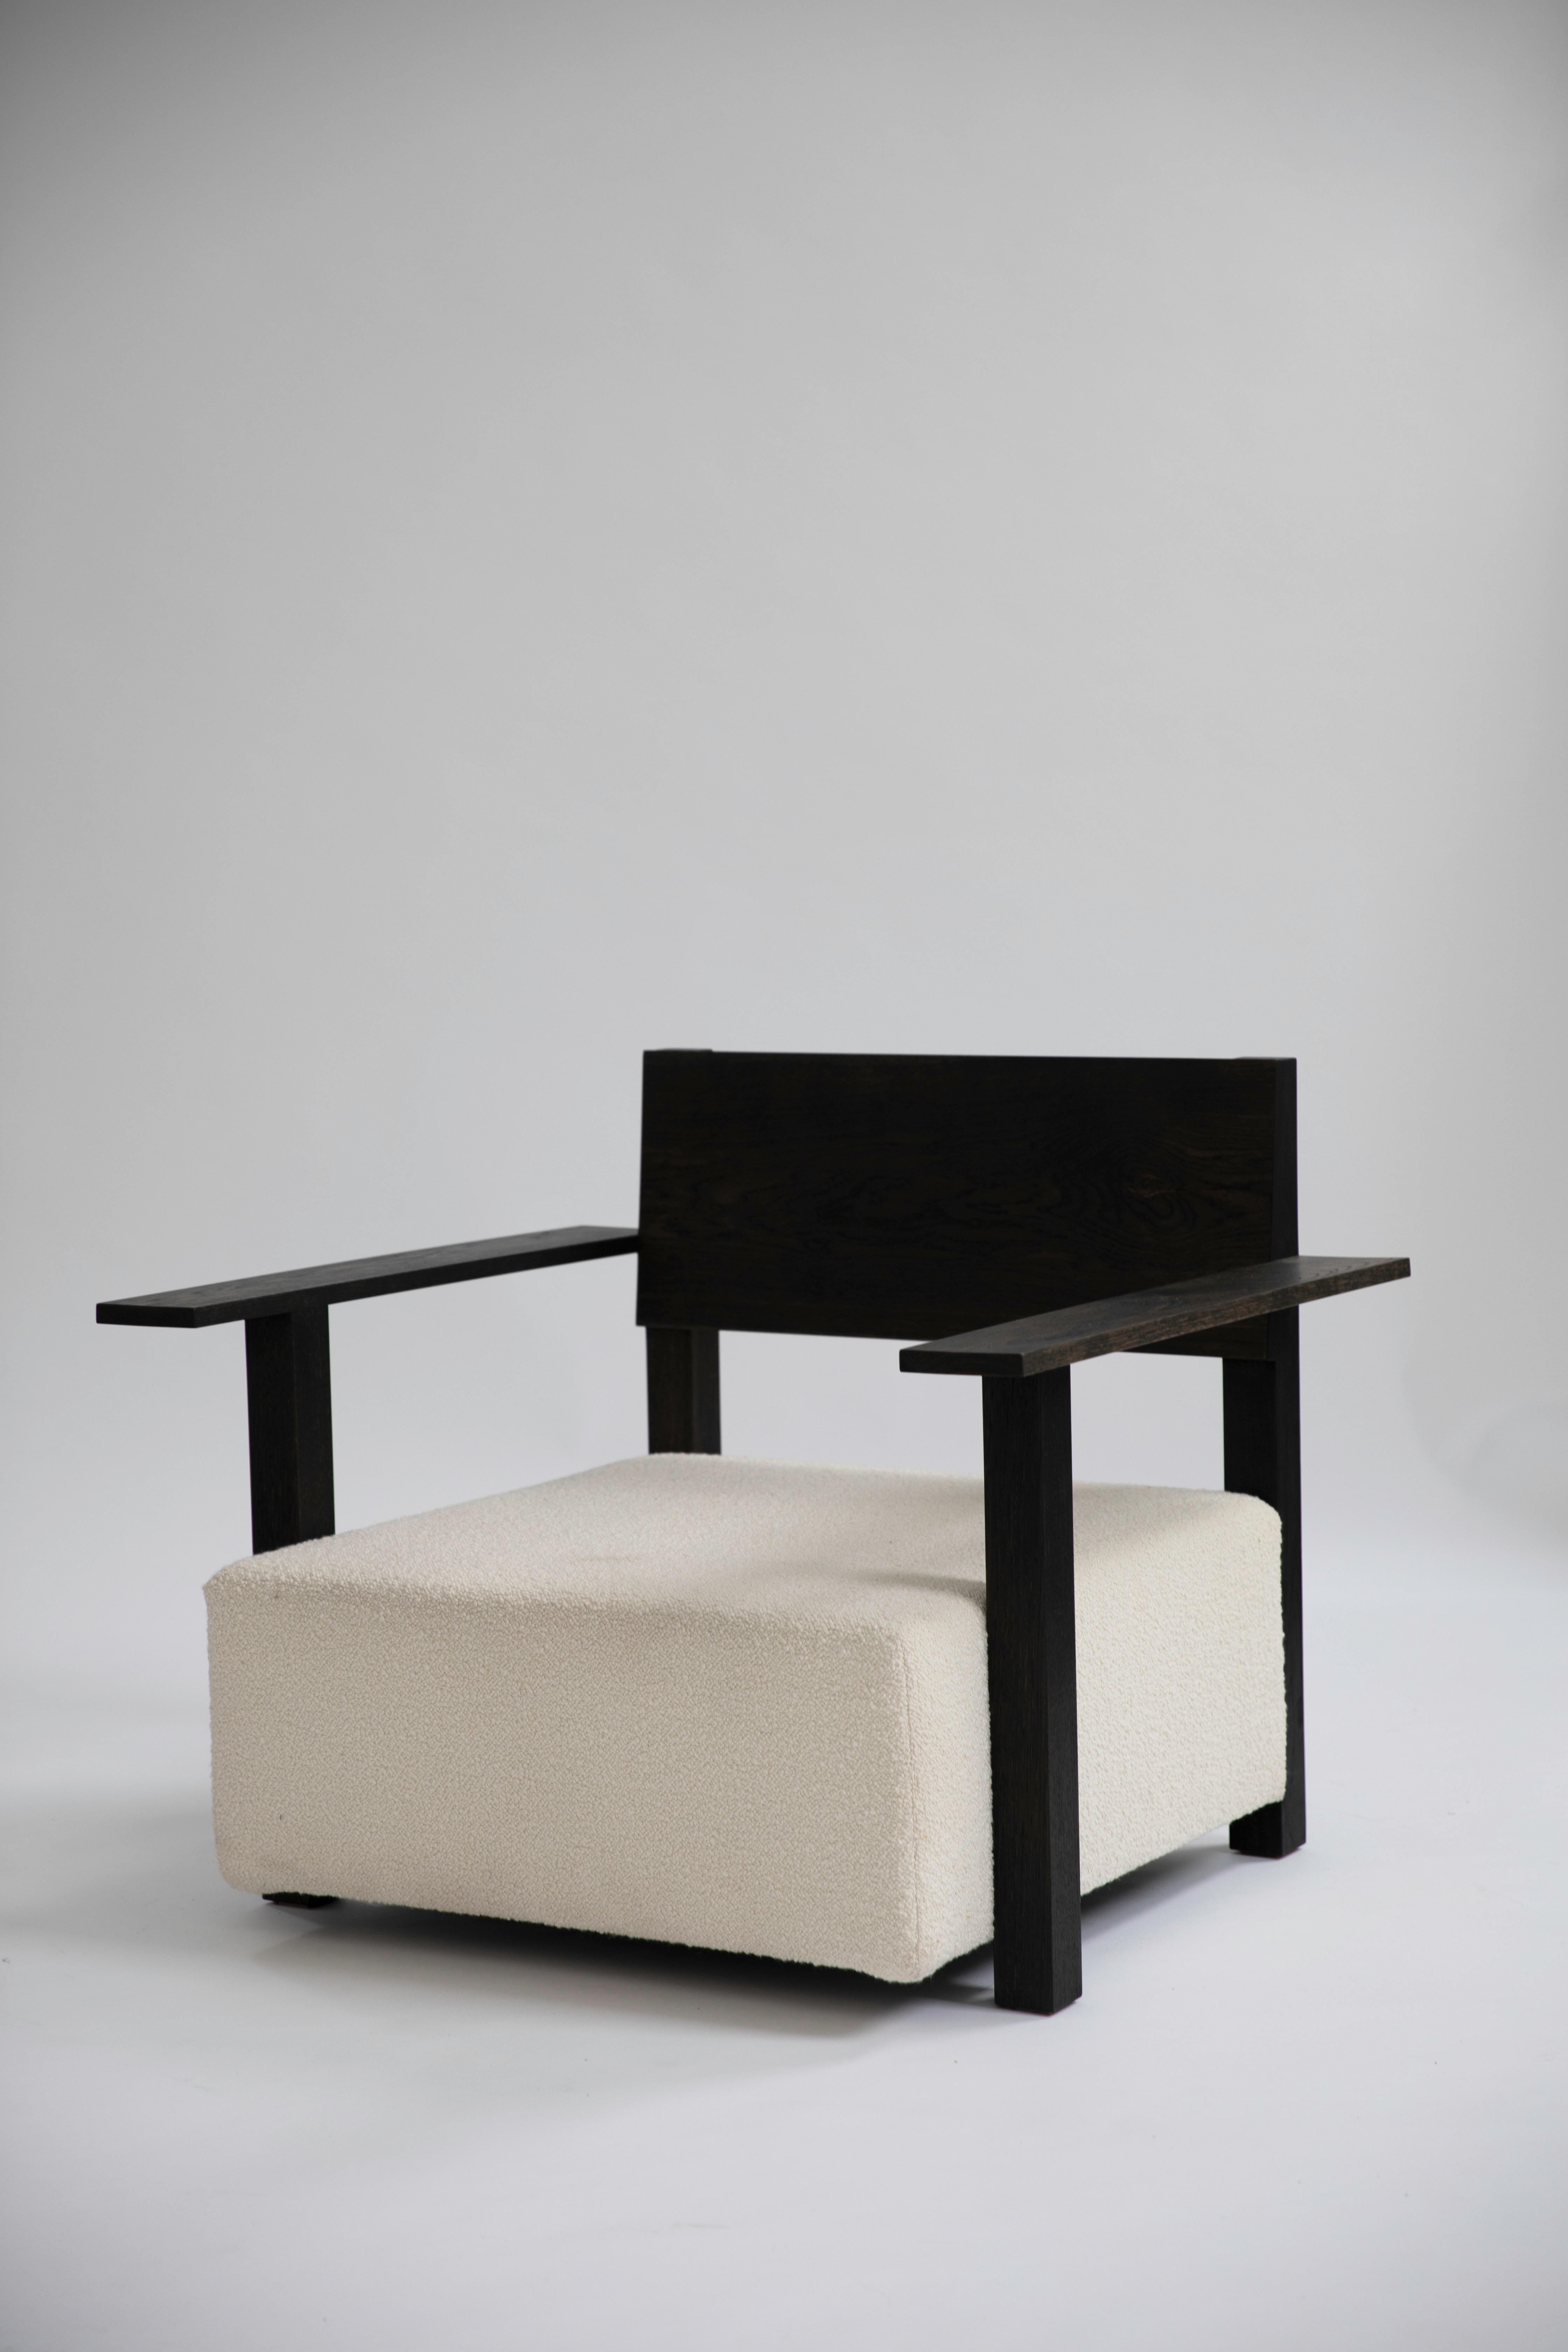 Block armchair by Fred Rigby Studio.
Dimensions: D 80 x W 100 x H 85 cm.
Materials: wood, bouclé.

Fred Rigby Studio is a London-based furniture and interior design practice founded by Fred Rigby in 2008. The independent studio works across